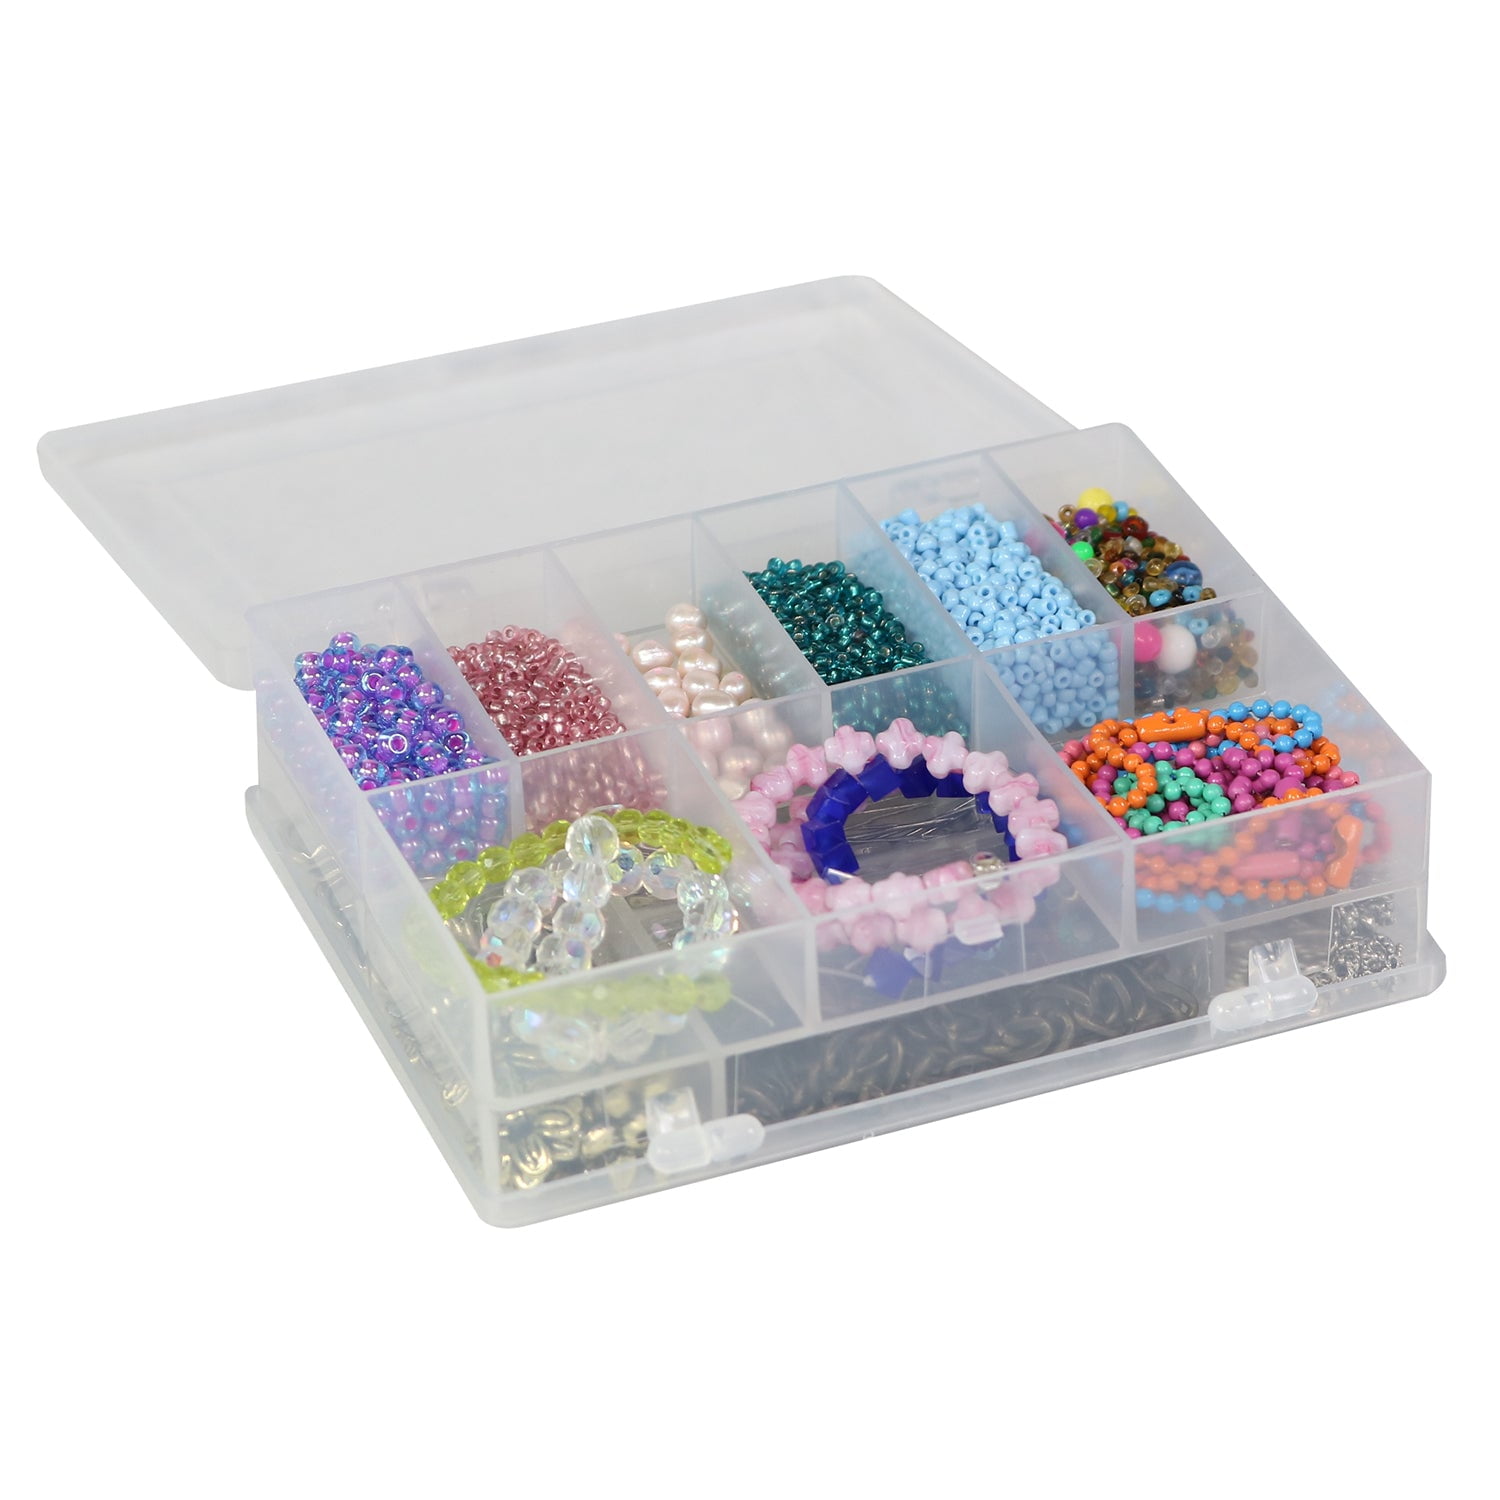 Everything Mary 5 Compartment Plastic Bead Storage Box - 5 Total Storage Spaces- Pink Organizer Storage for Large, Small, Mini, Tiny Beads - Plastic